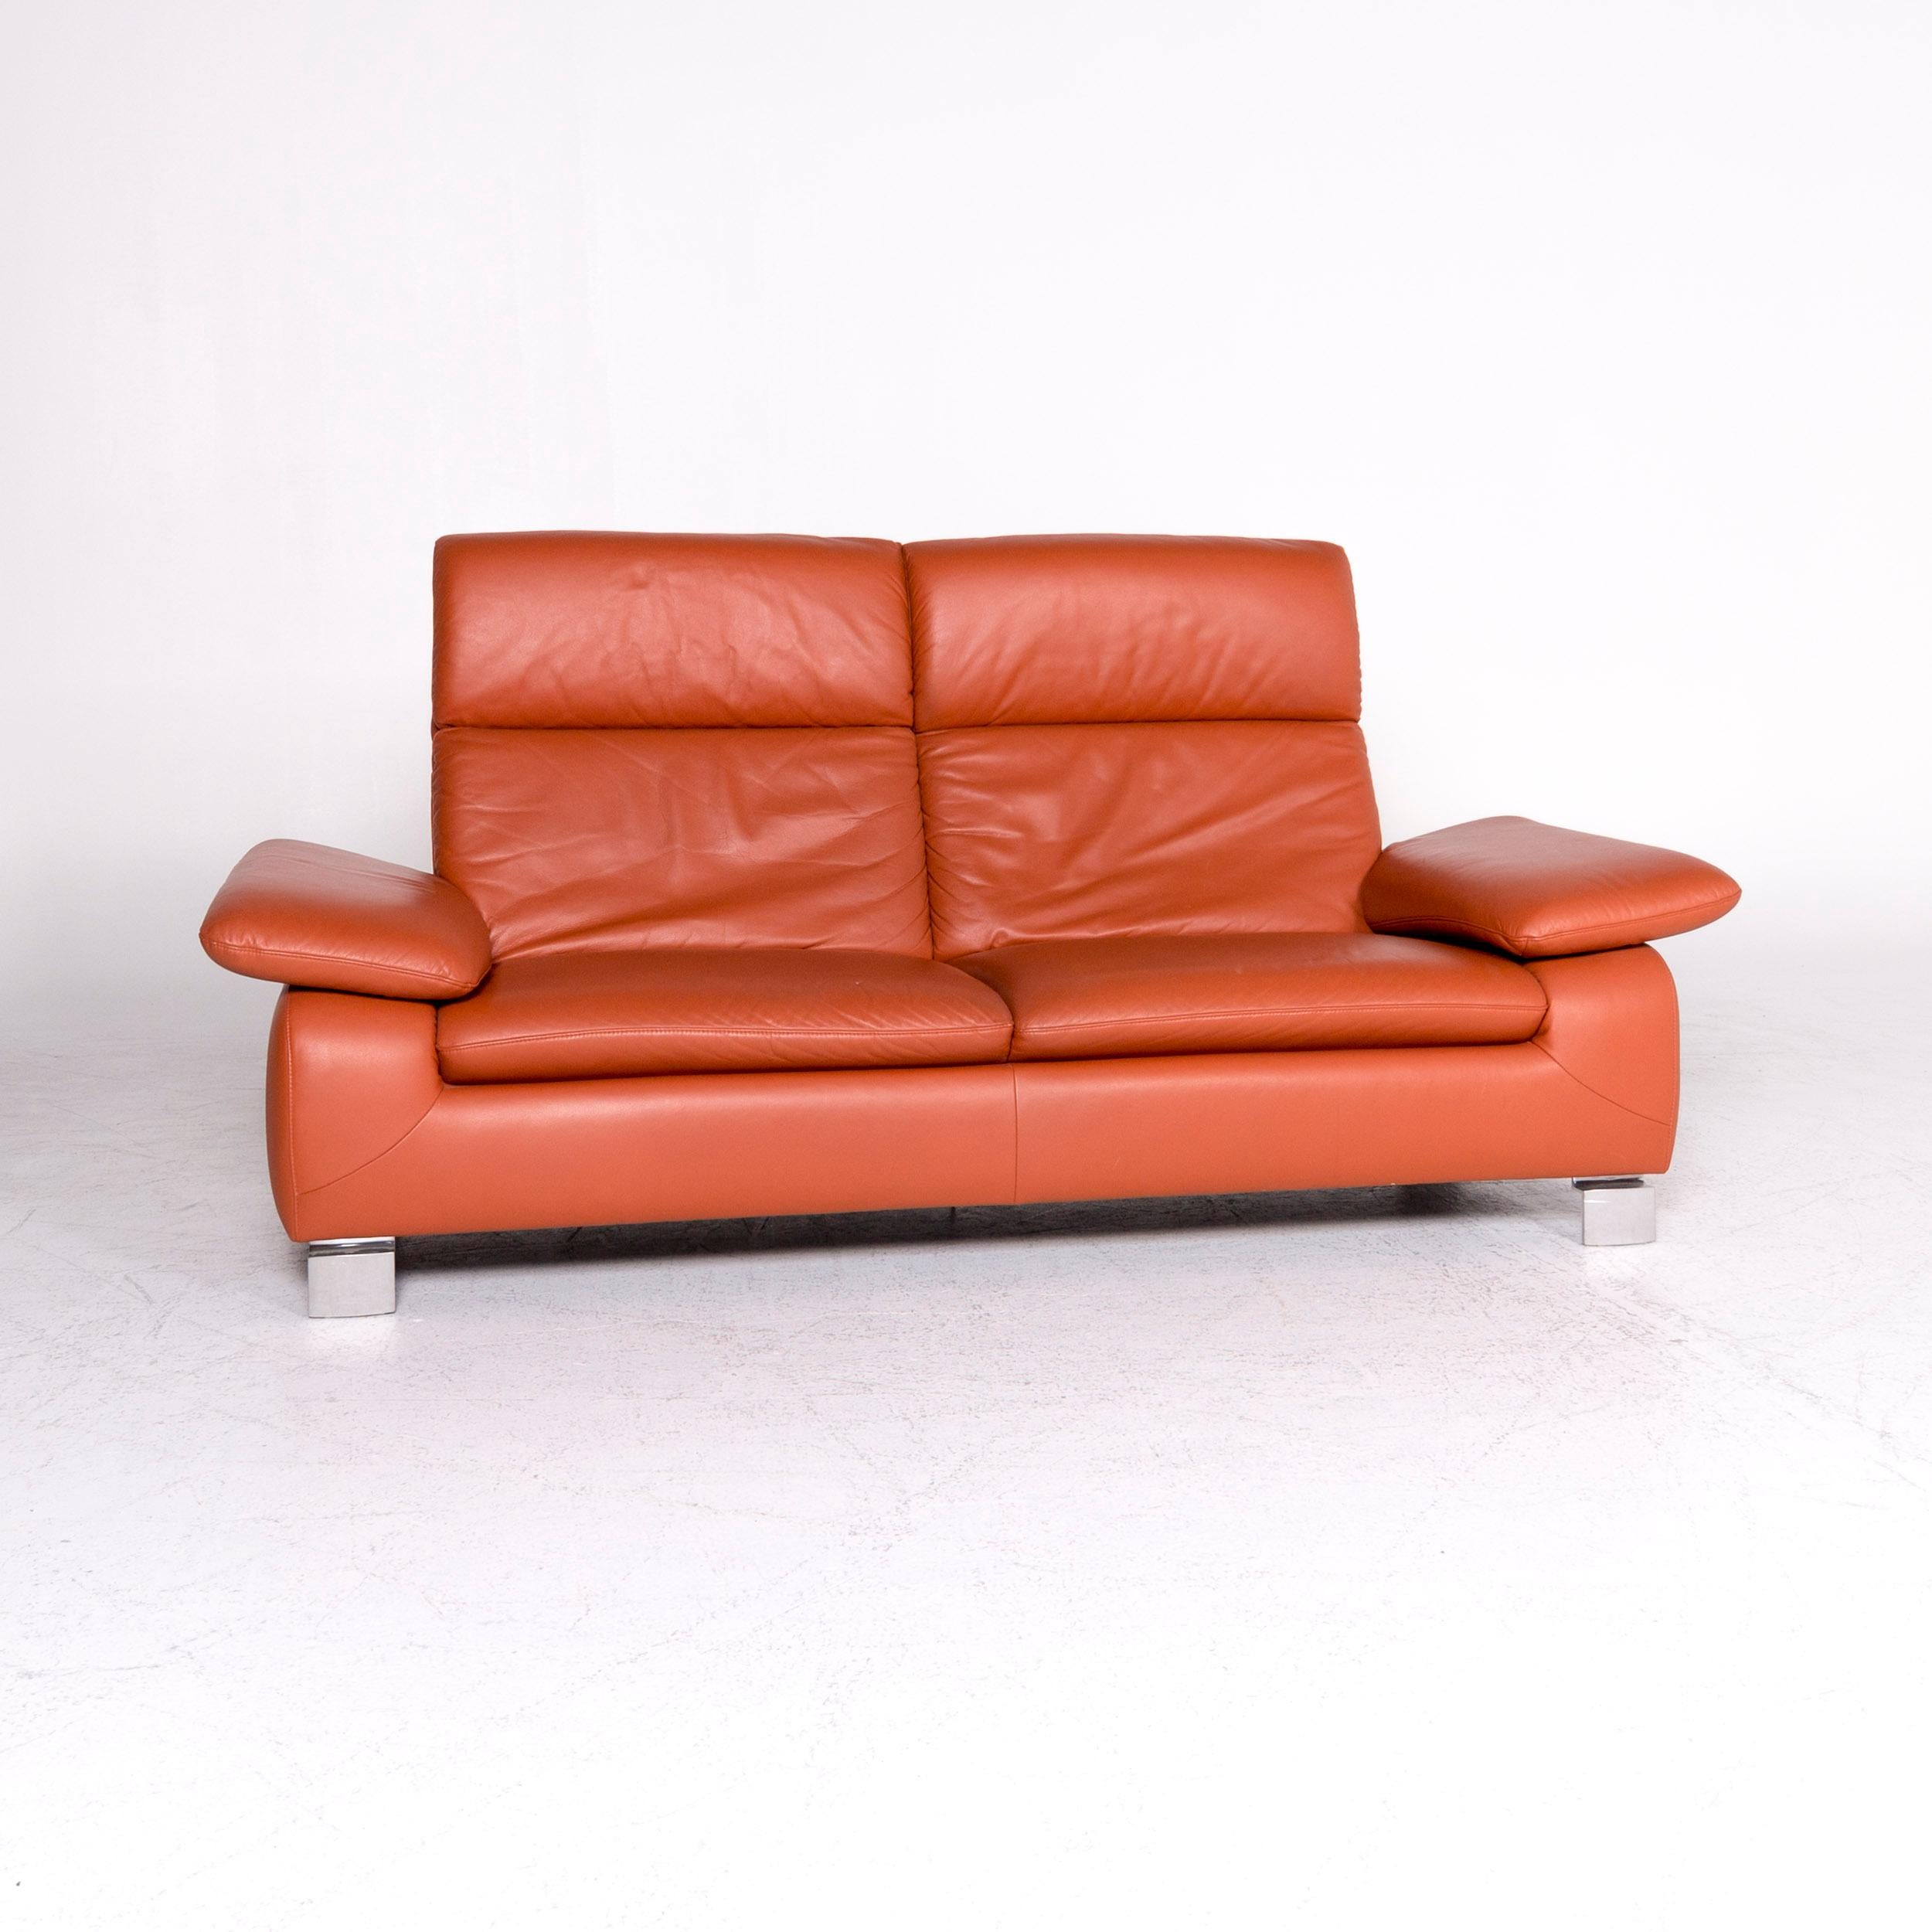 orange leather couch